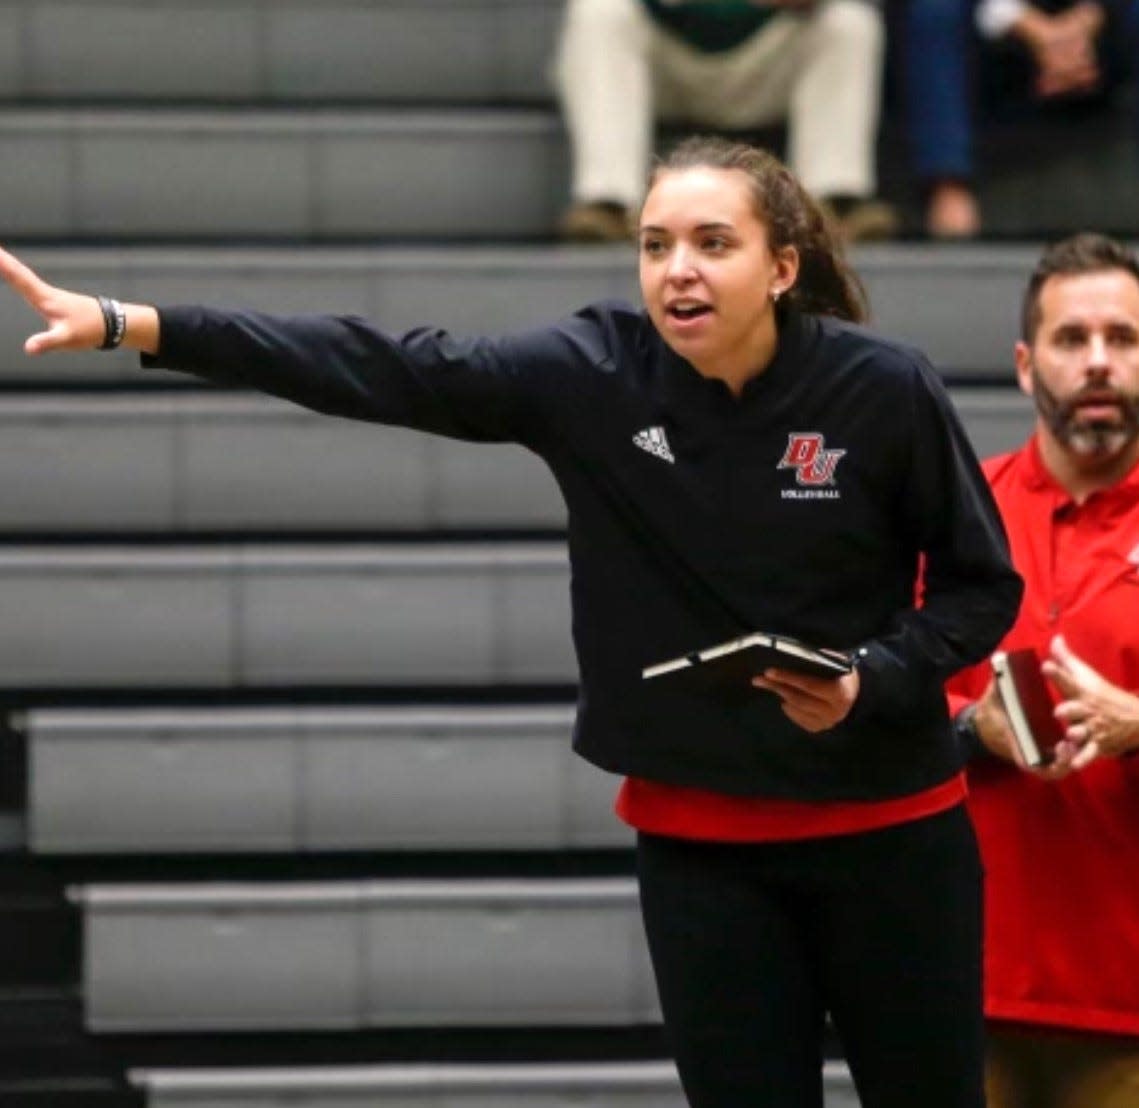 Former Harper Creek standout Charley Andrews has been named as the next head volleyball coach at Davenport University.